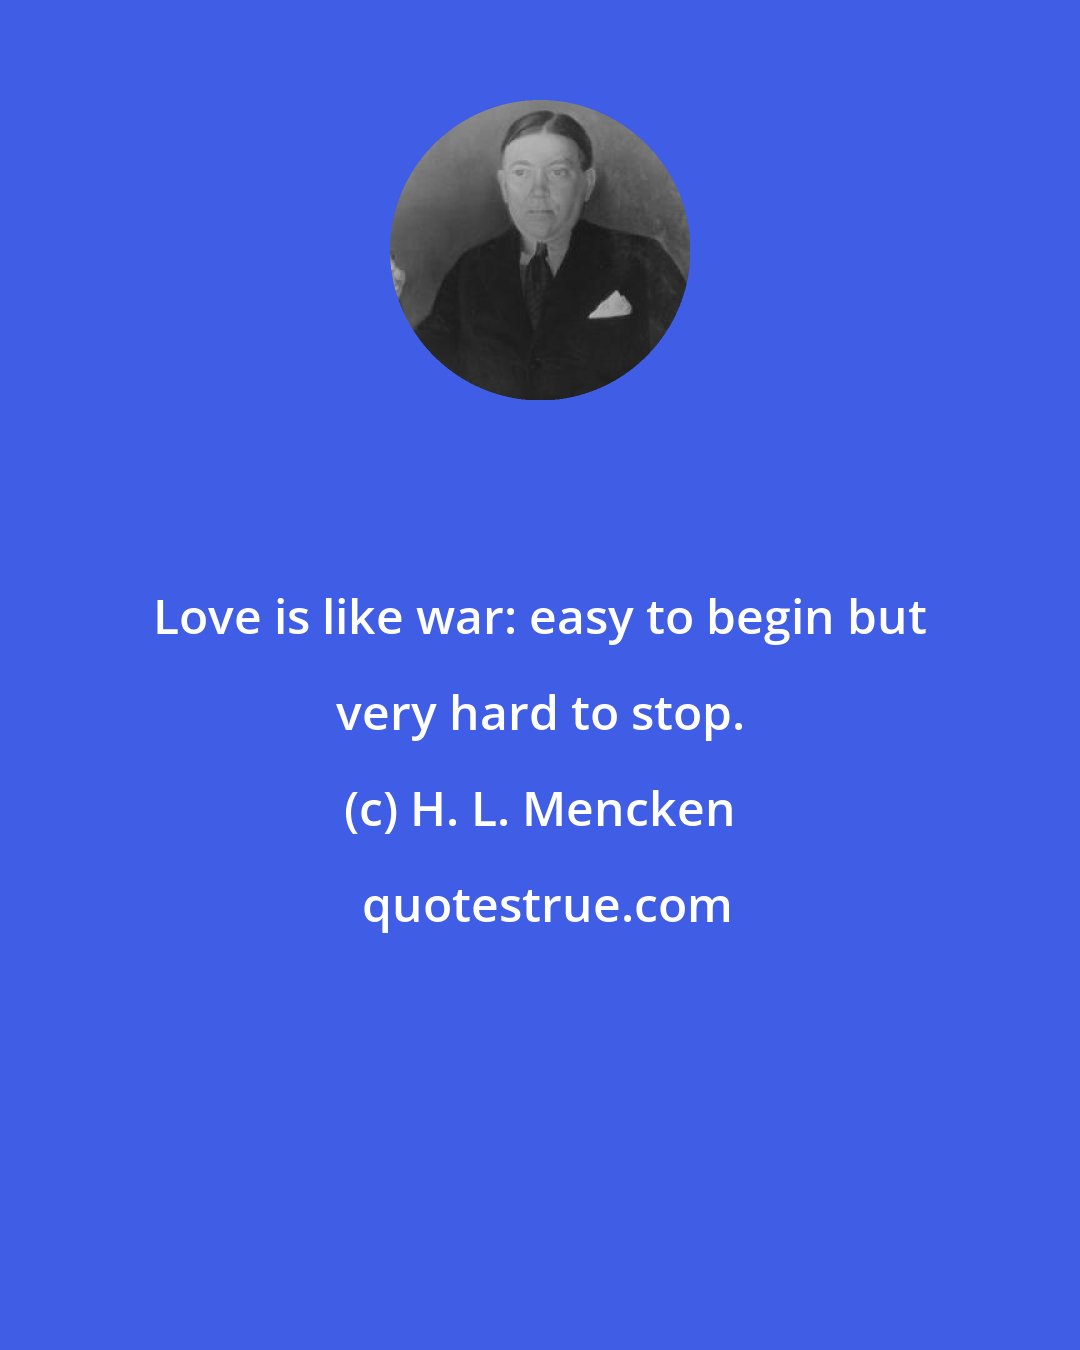 H. L. Mencken: Love is like war: easy to begin but very hard to stop.